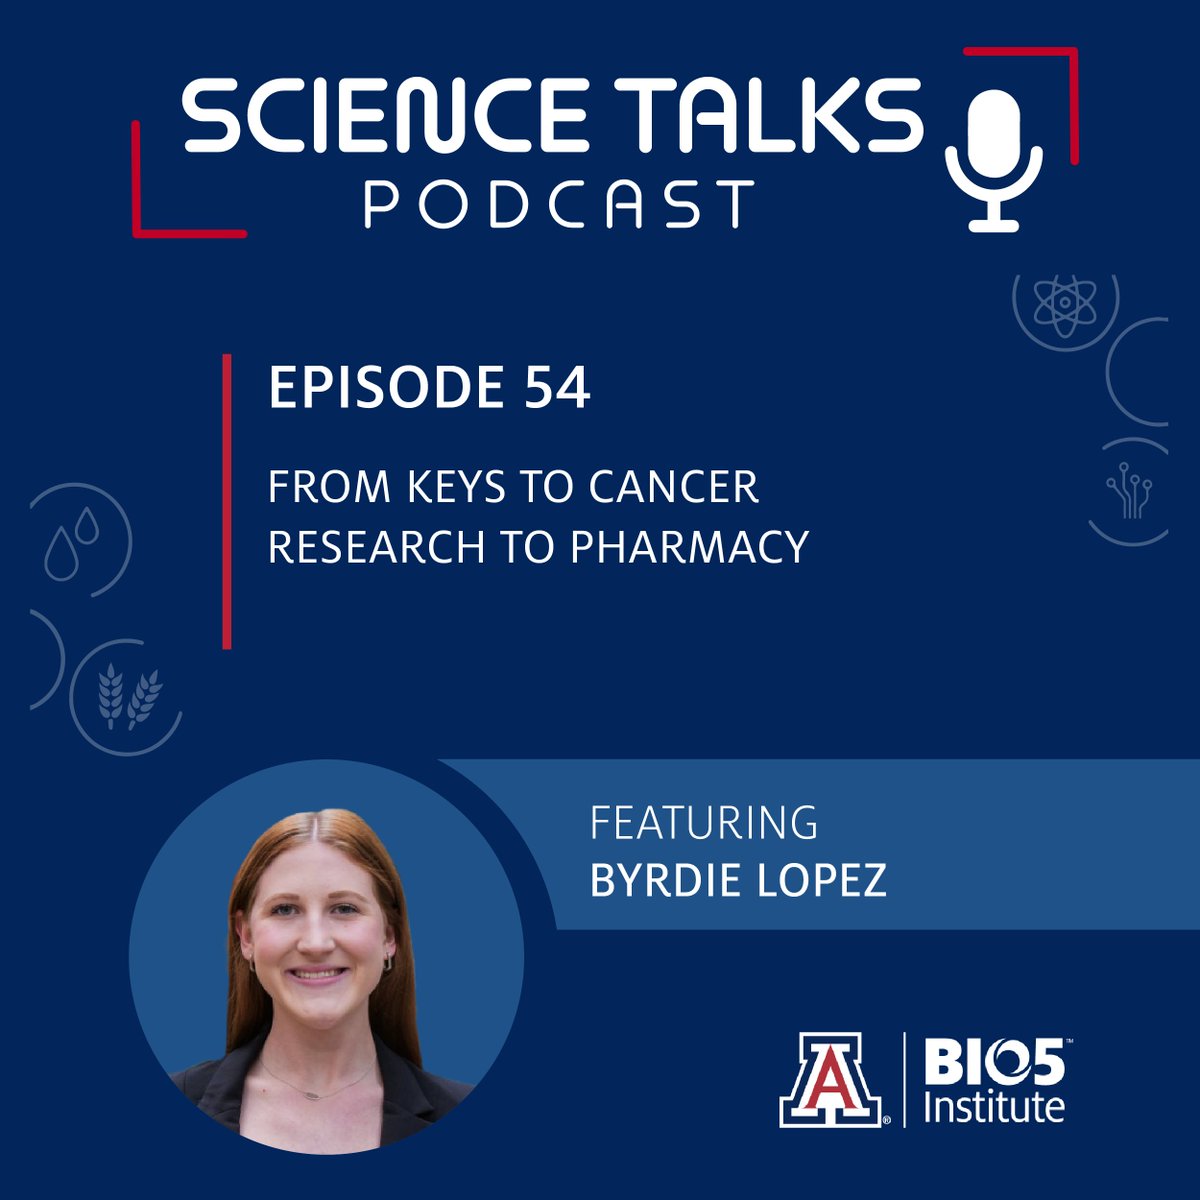 Meet Byrdie Lopez in our latest Science Talks podcast: From @KEYSInternship to cancer research to pharmacy. 'Pharmacy stood out because of my love for chemistry & desire to help people understand their medications better. ' Read the full interview: bit.ly/3y6Z32u